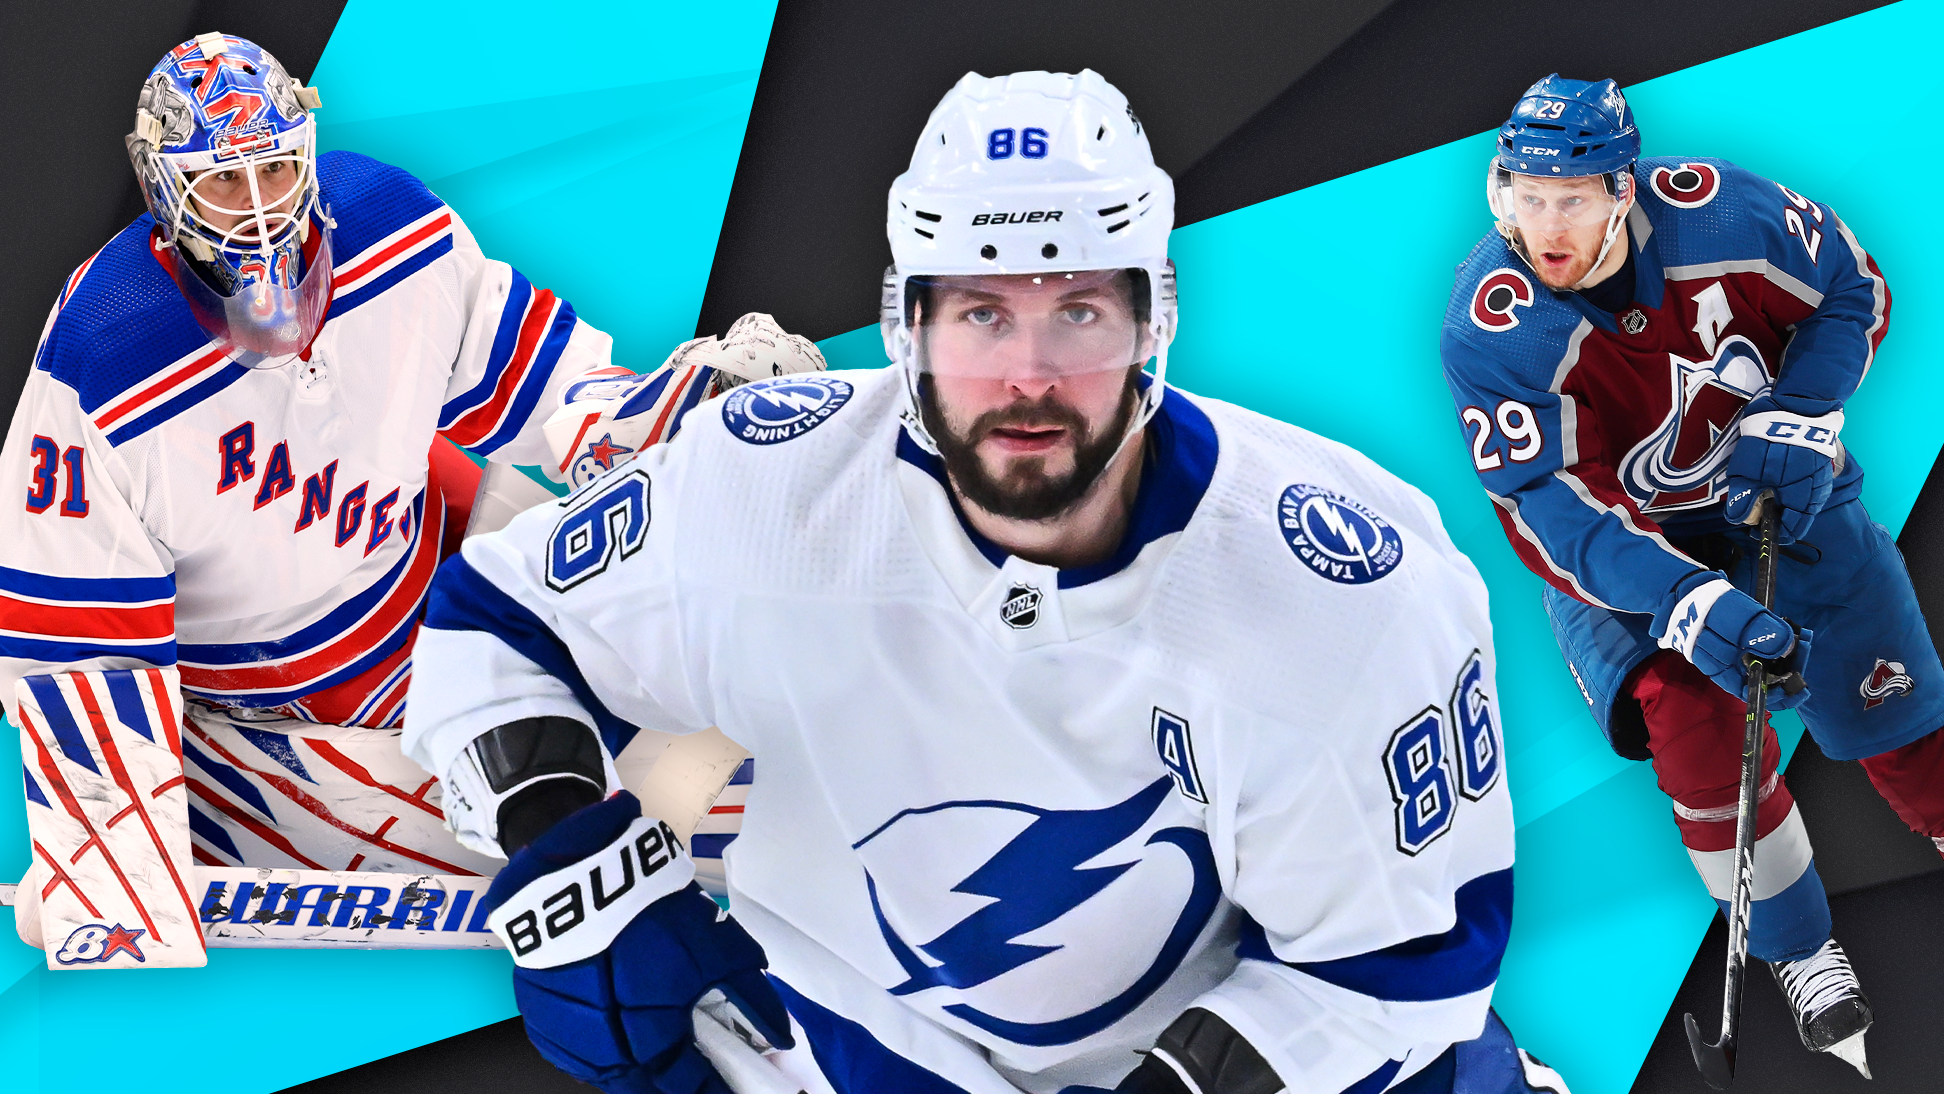 NHL Power Rankings - 1-32 poll, young talent for each team - ESPN